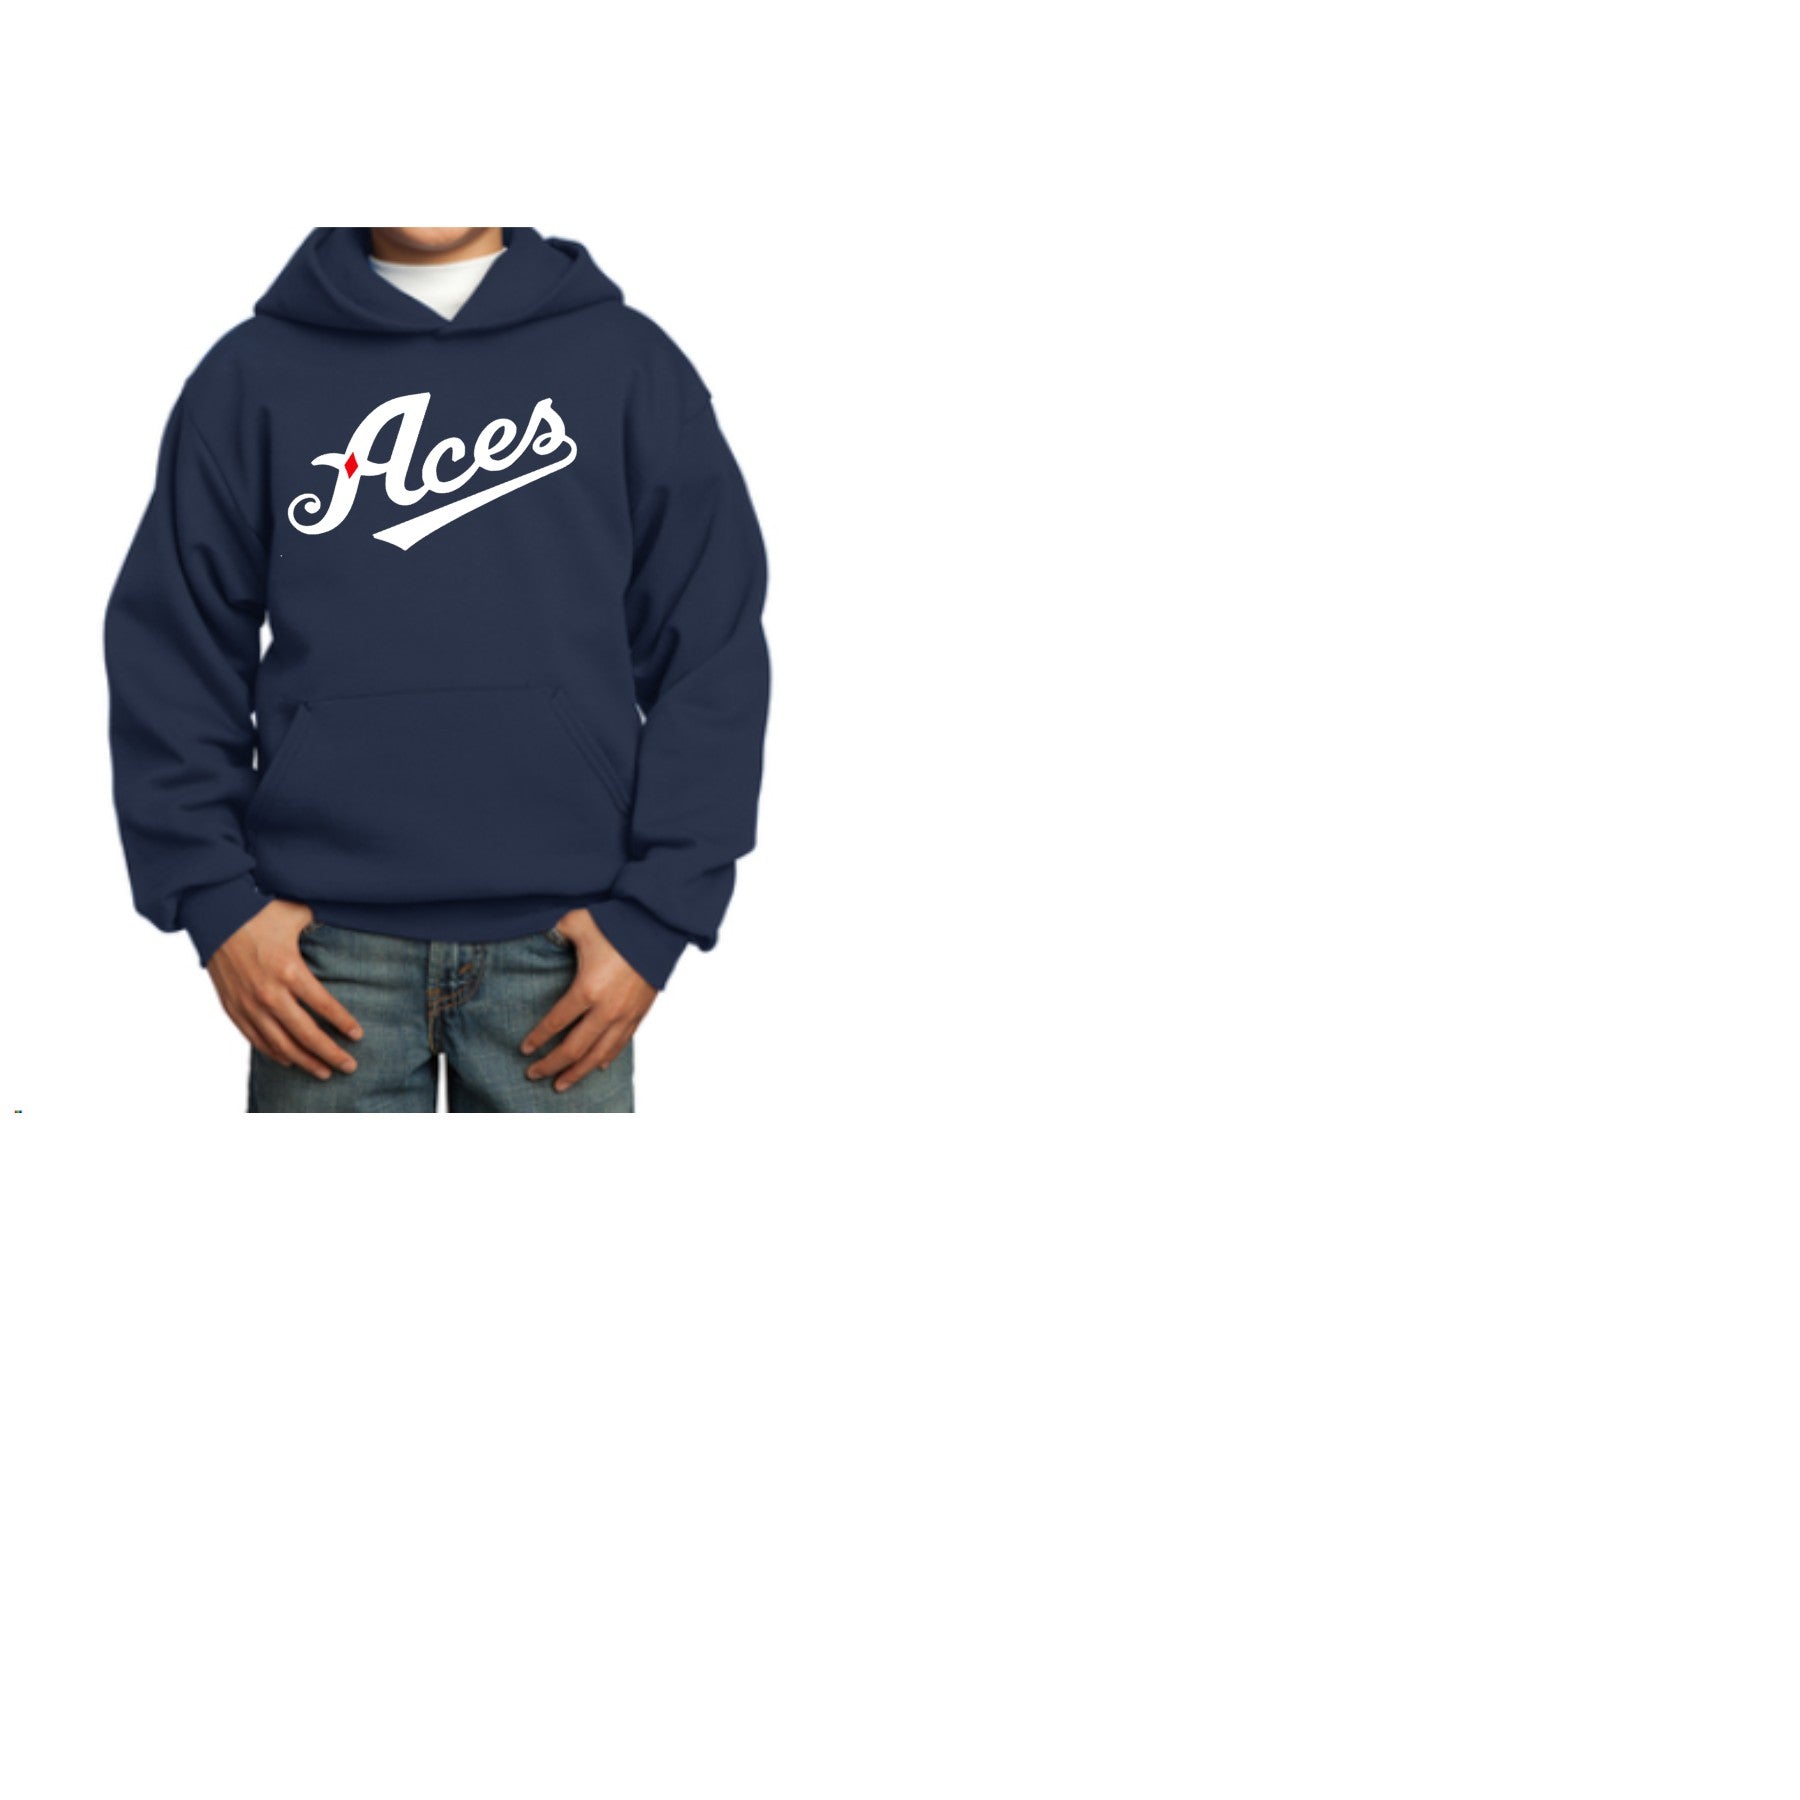 Aces Sweatshirt front only